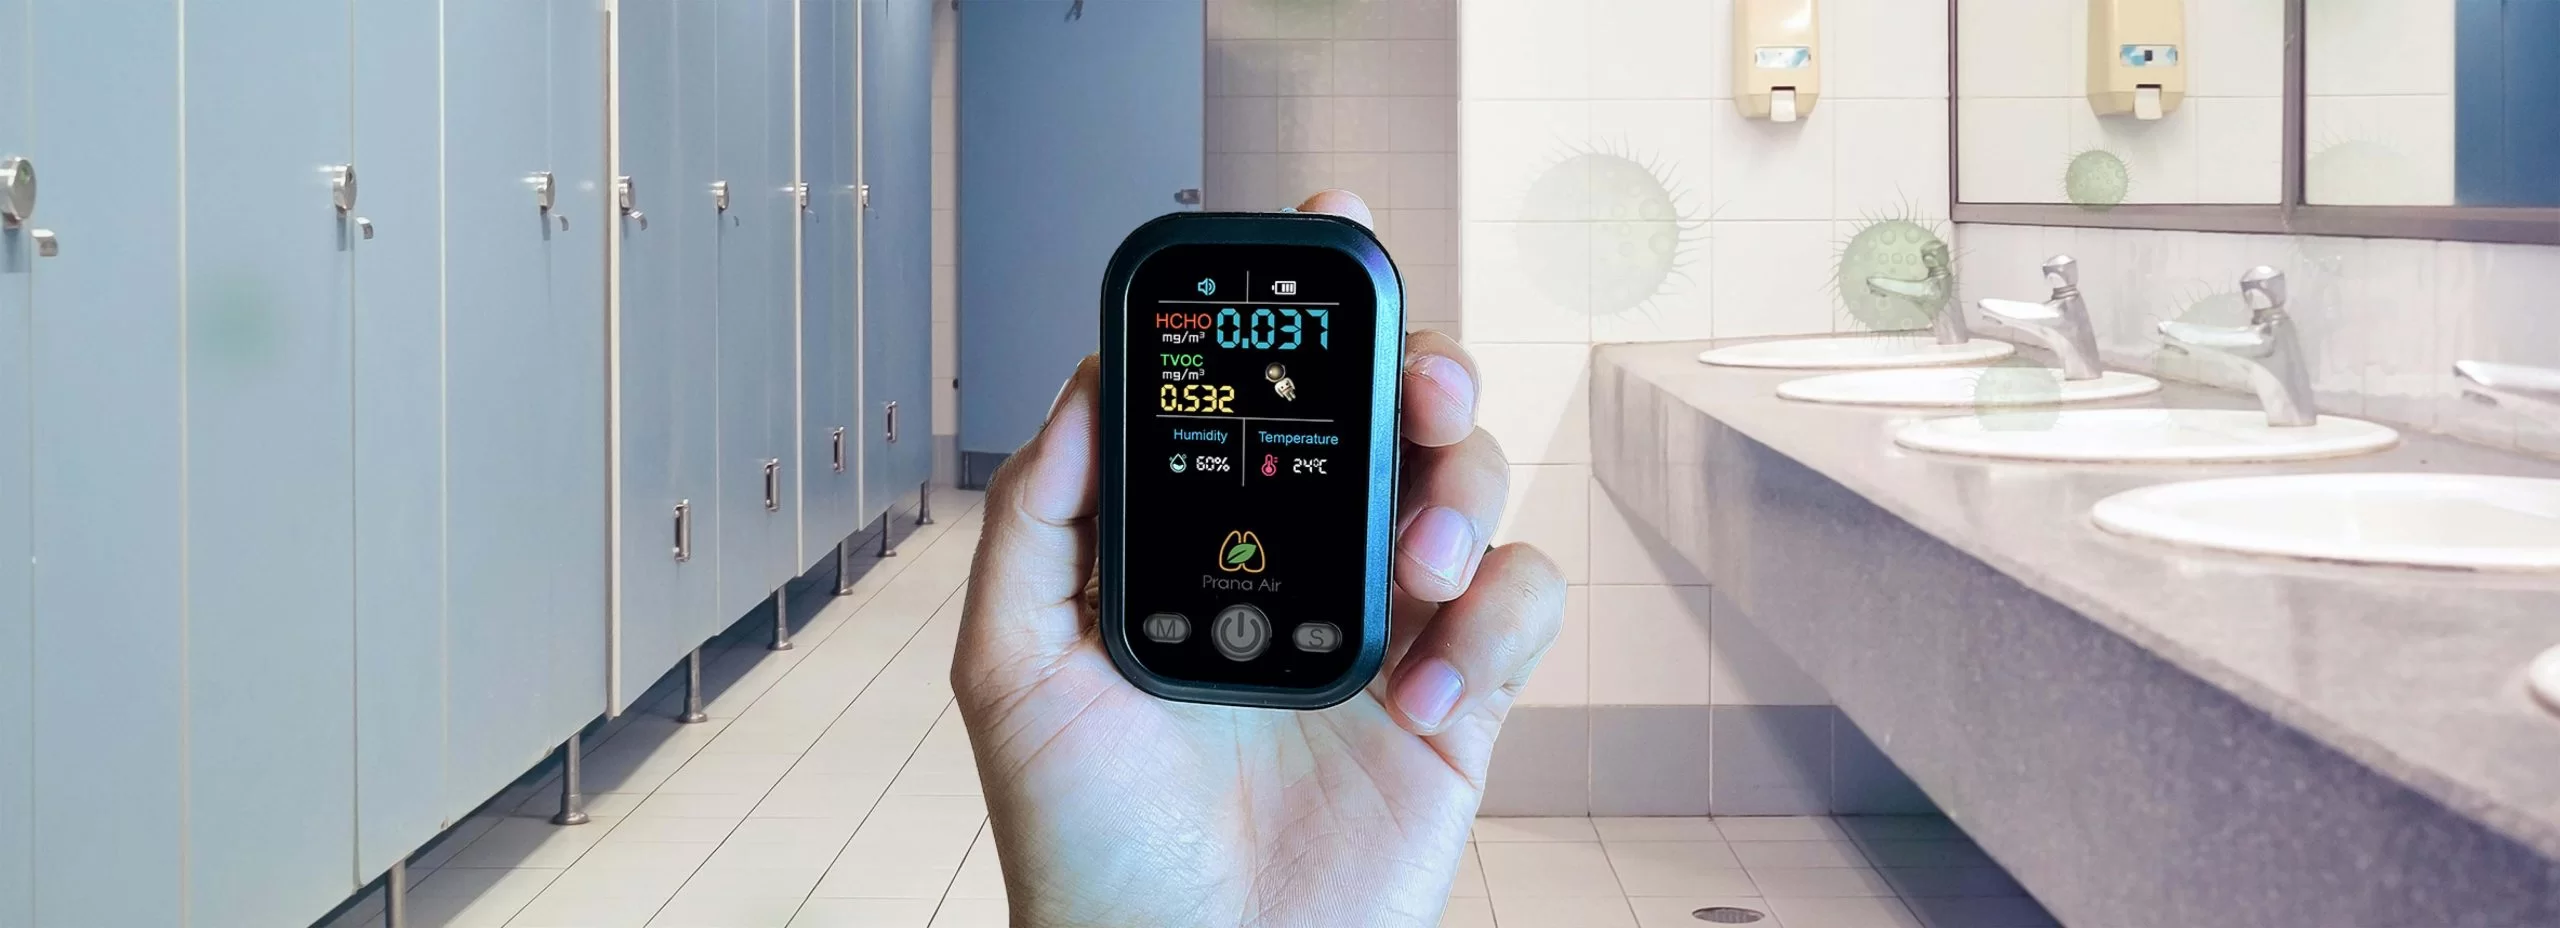 monitoring real-time odor tvc in washroom